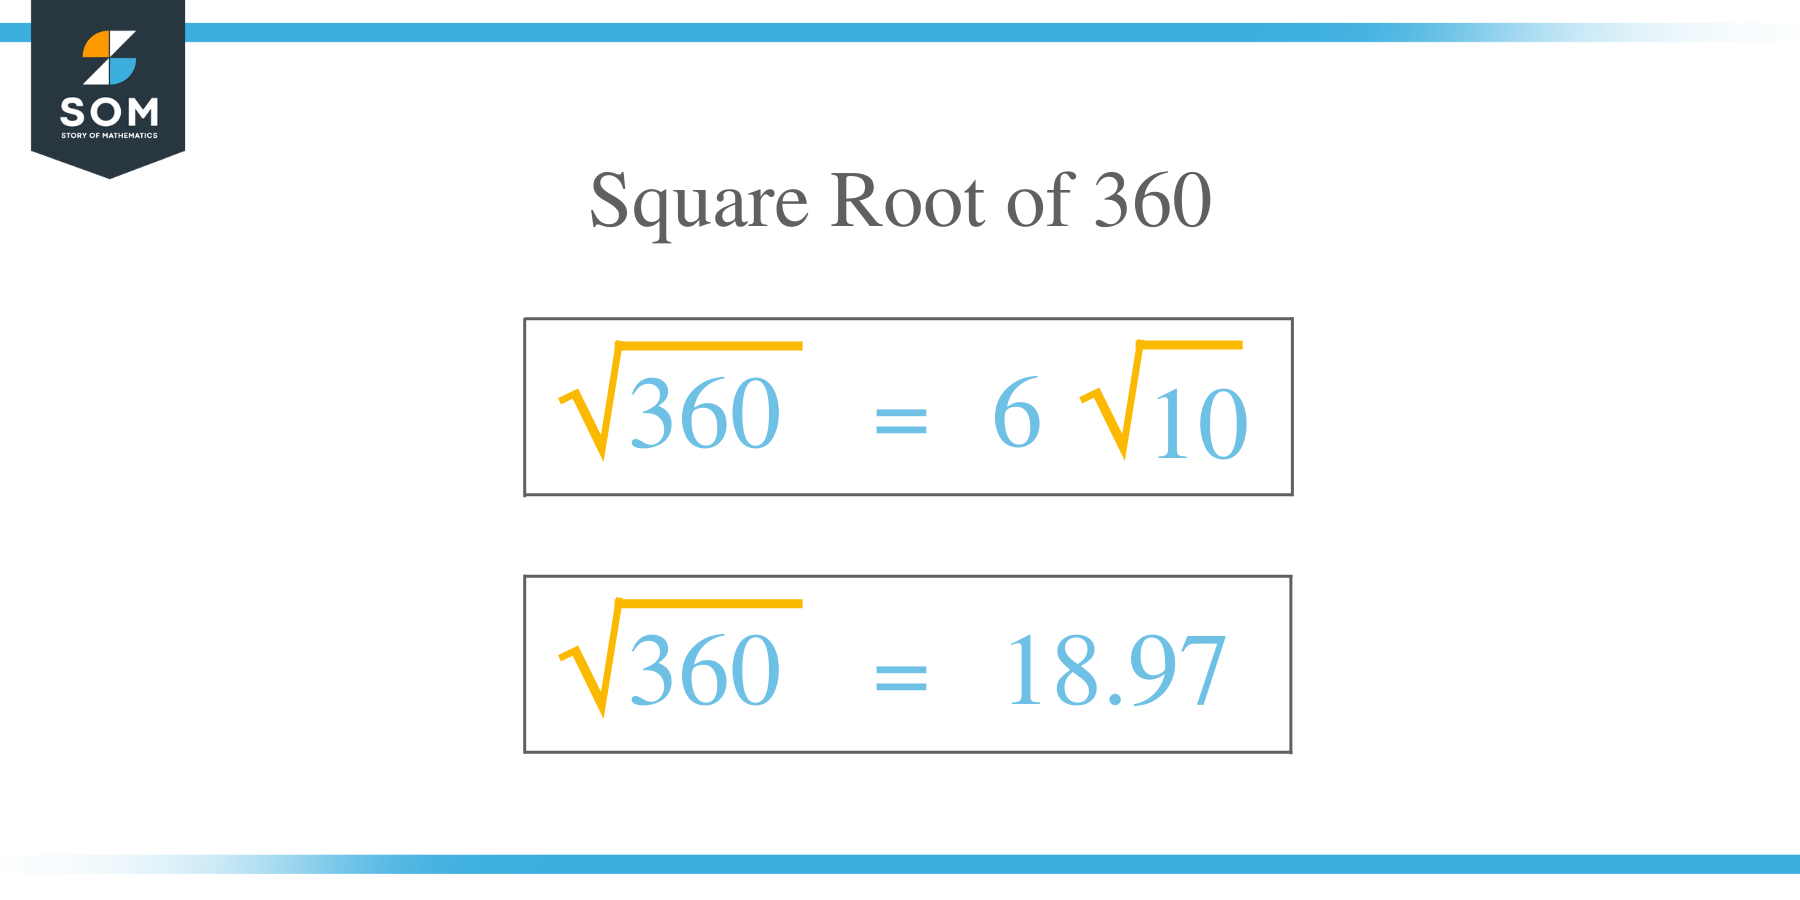 Square Root of 360